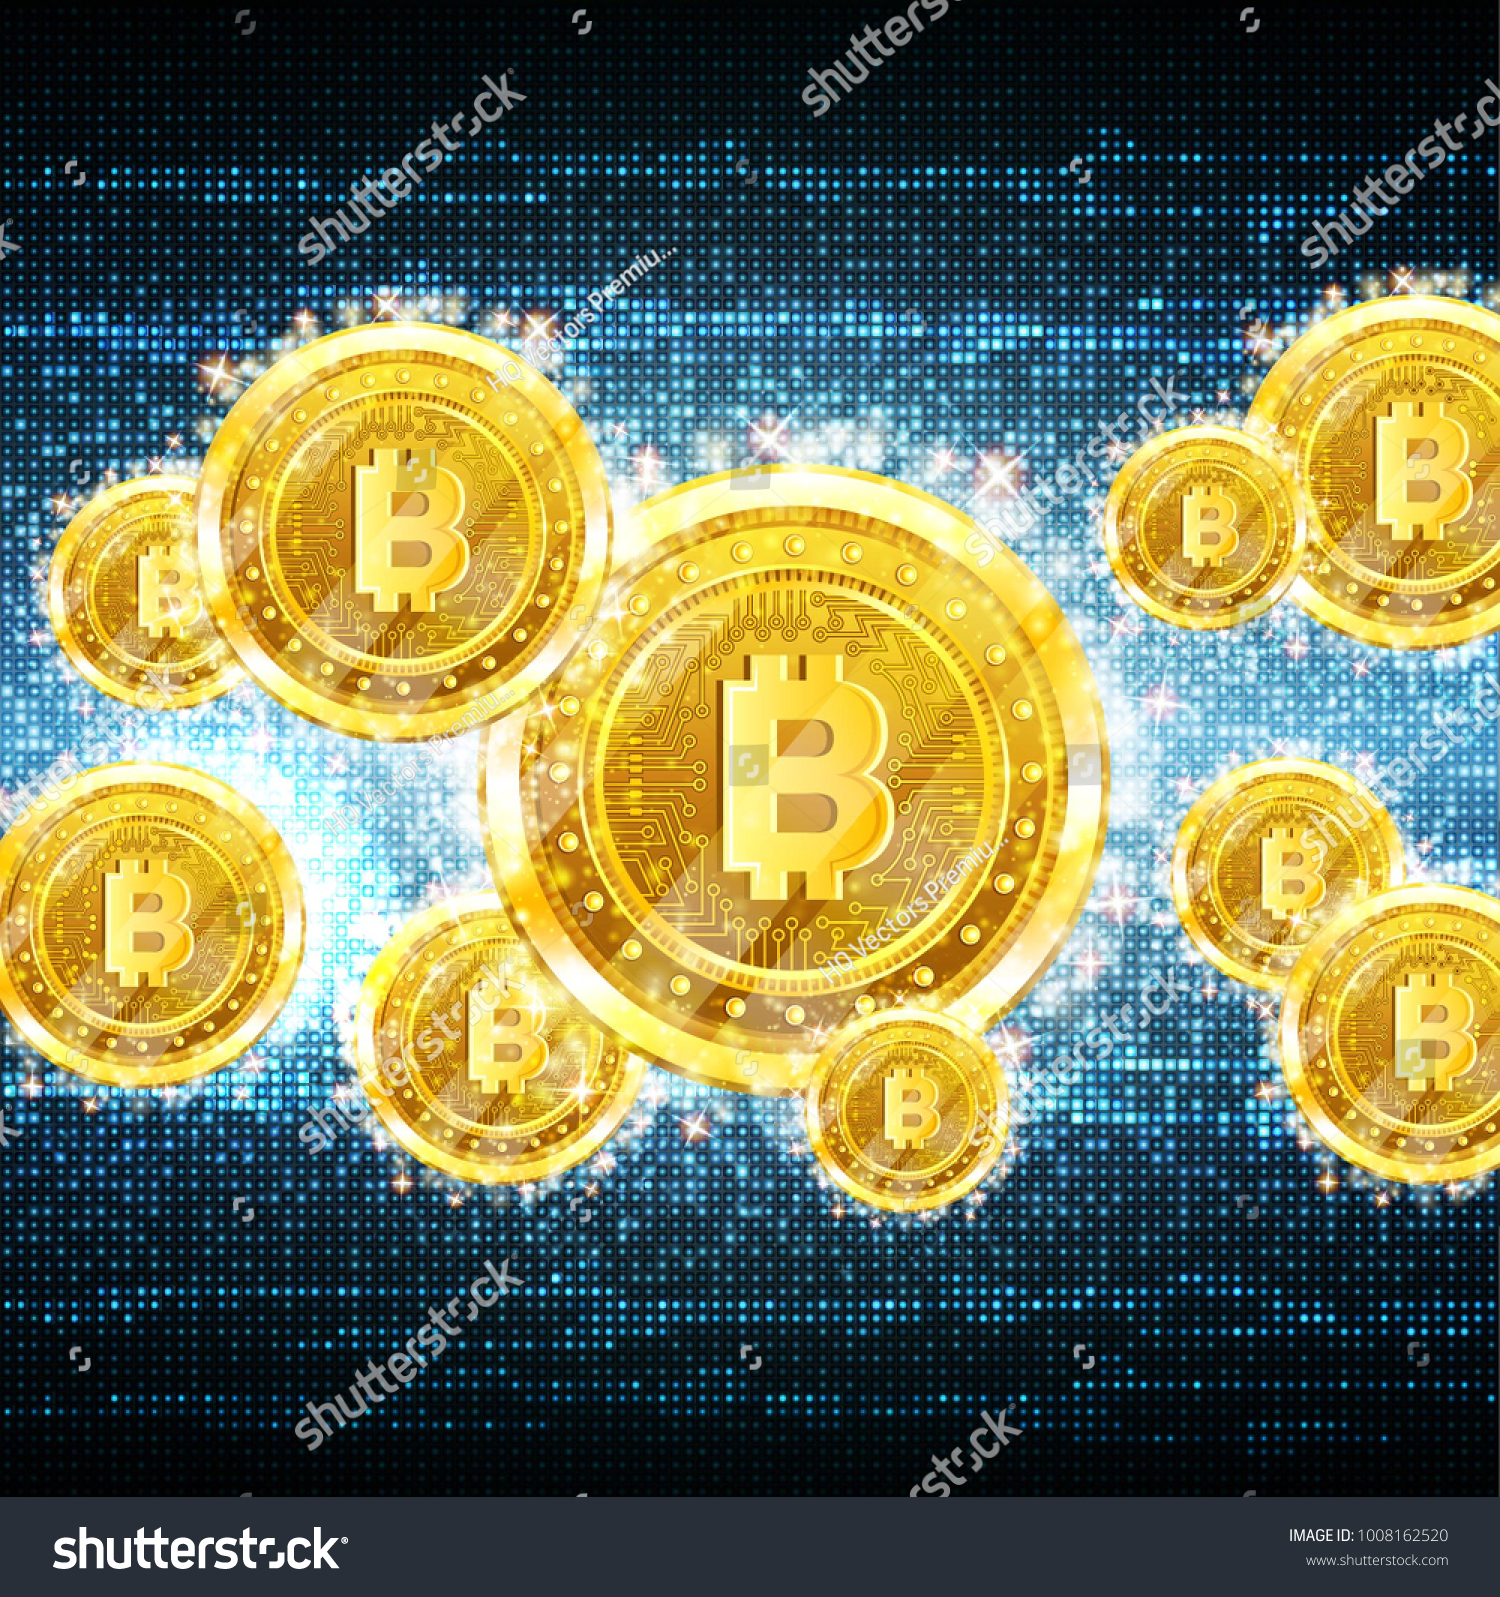 SVG of Golden bit coins flying on blue abstract noise background svg